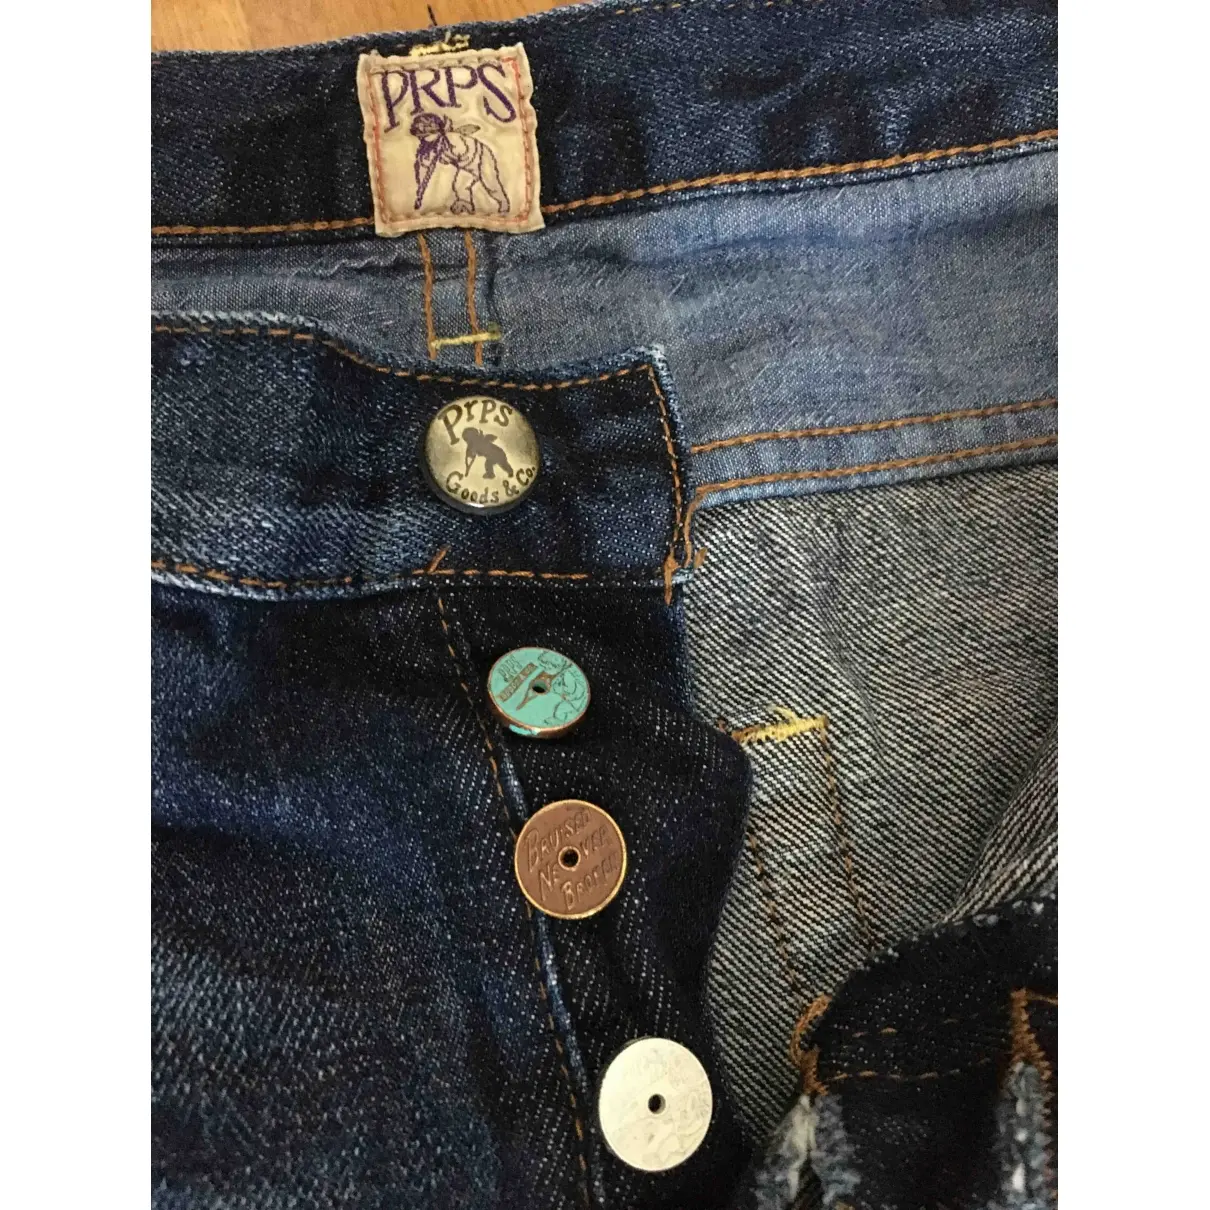 Prps Straight jeans for sale